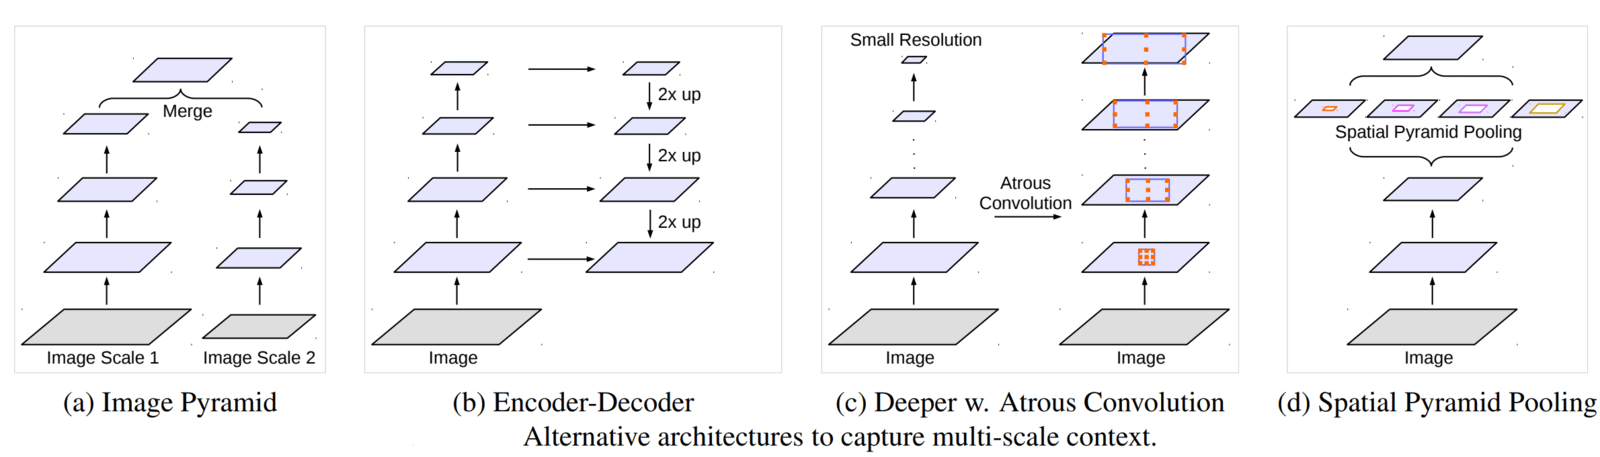 Alternative approaches to the problem of multi-scale object extraction referenced in the Deeplabv3 paper.